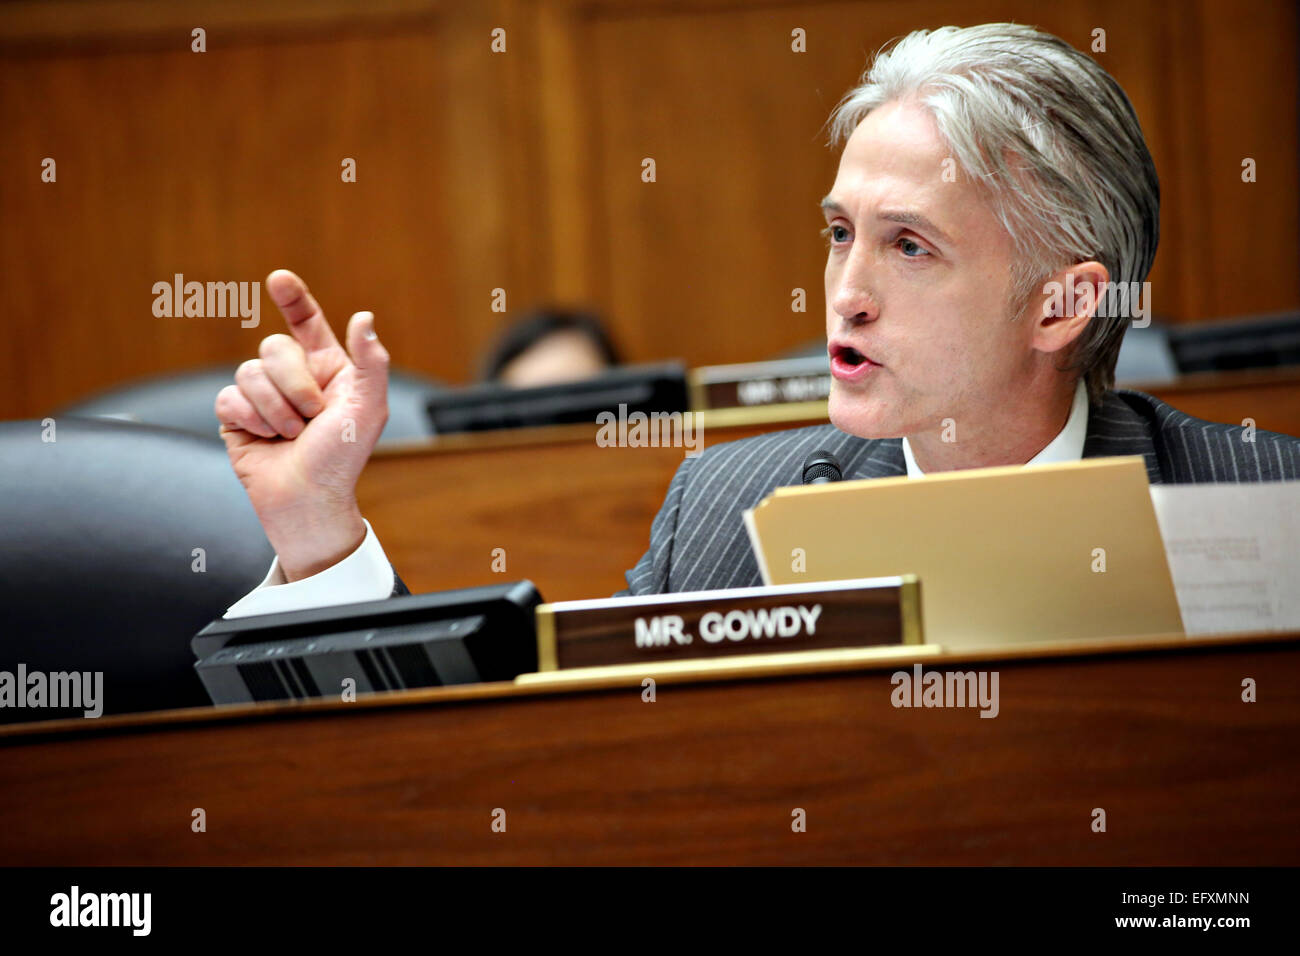 Congressmen Trey Gowdy questions a witness during the House Oversight and Government Reform Committee hearing on the IRS targeting of political groups on Capitol Hill March 26, 2014 in Washington, DC. Stock Photo